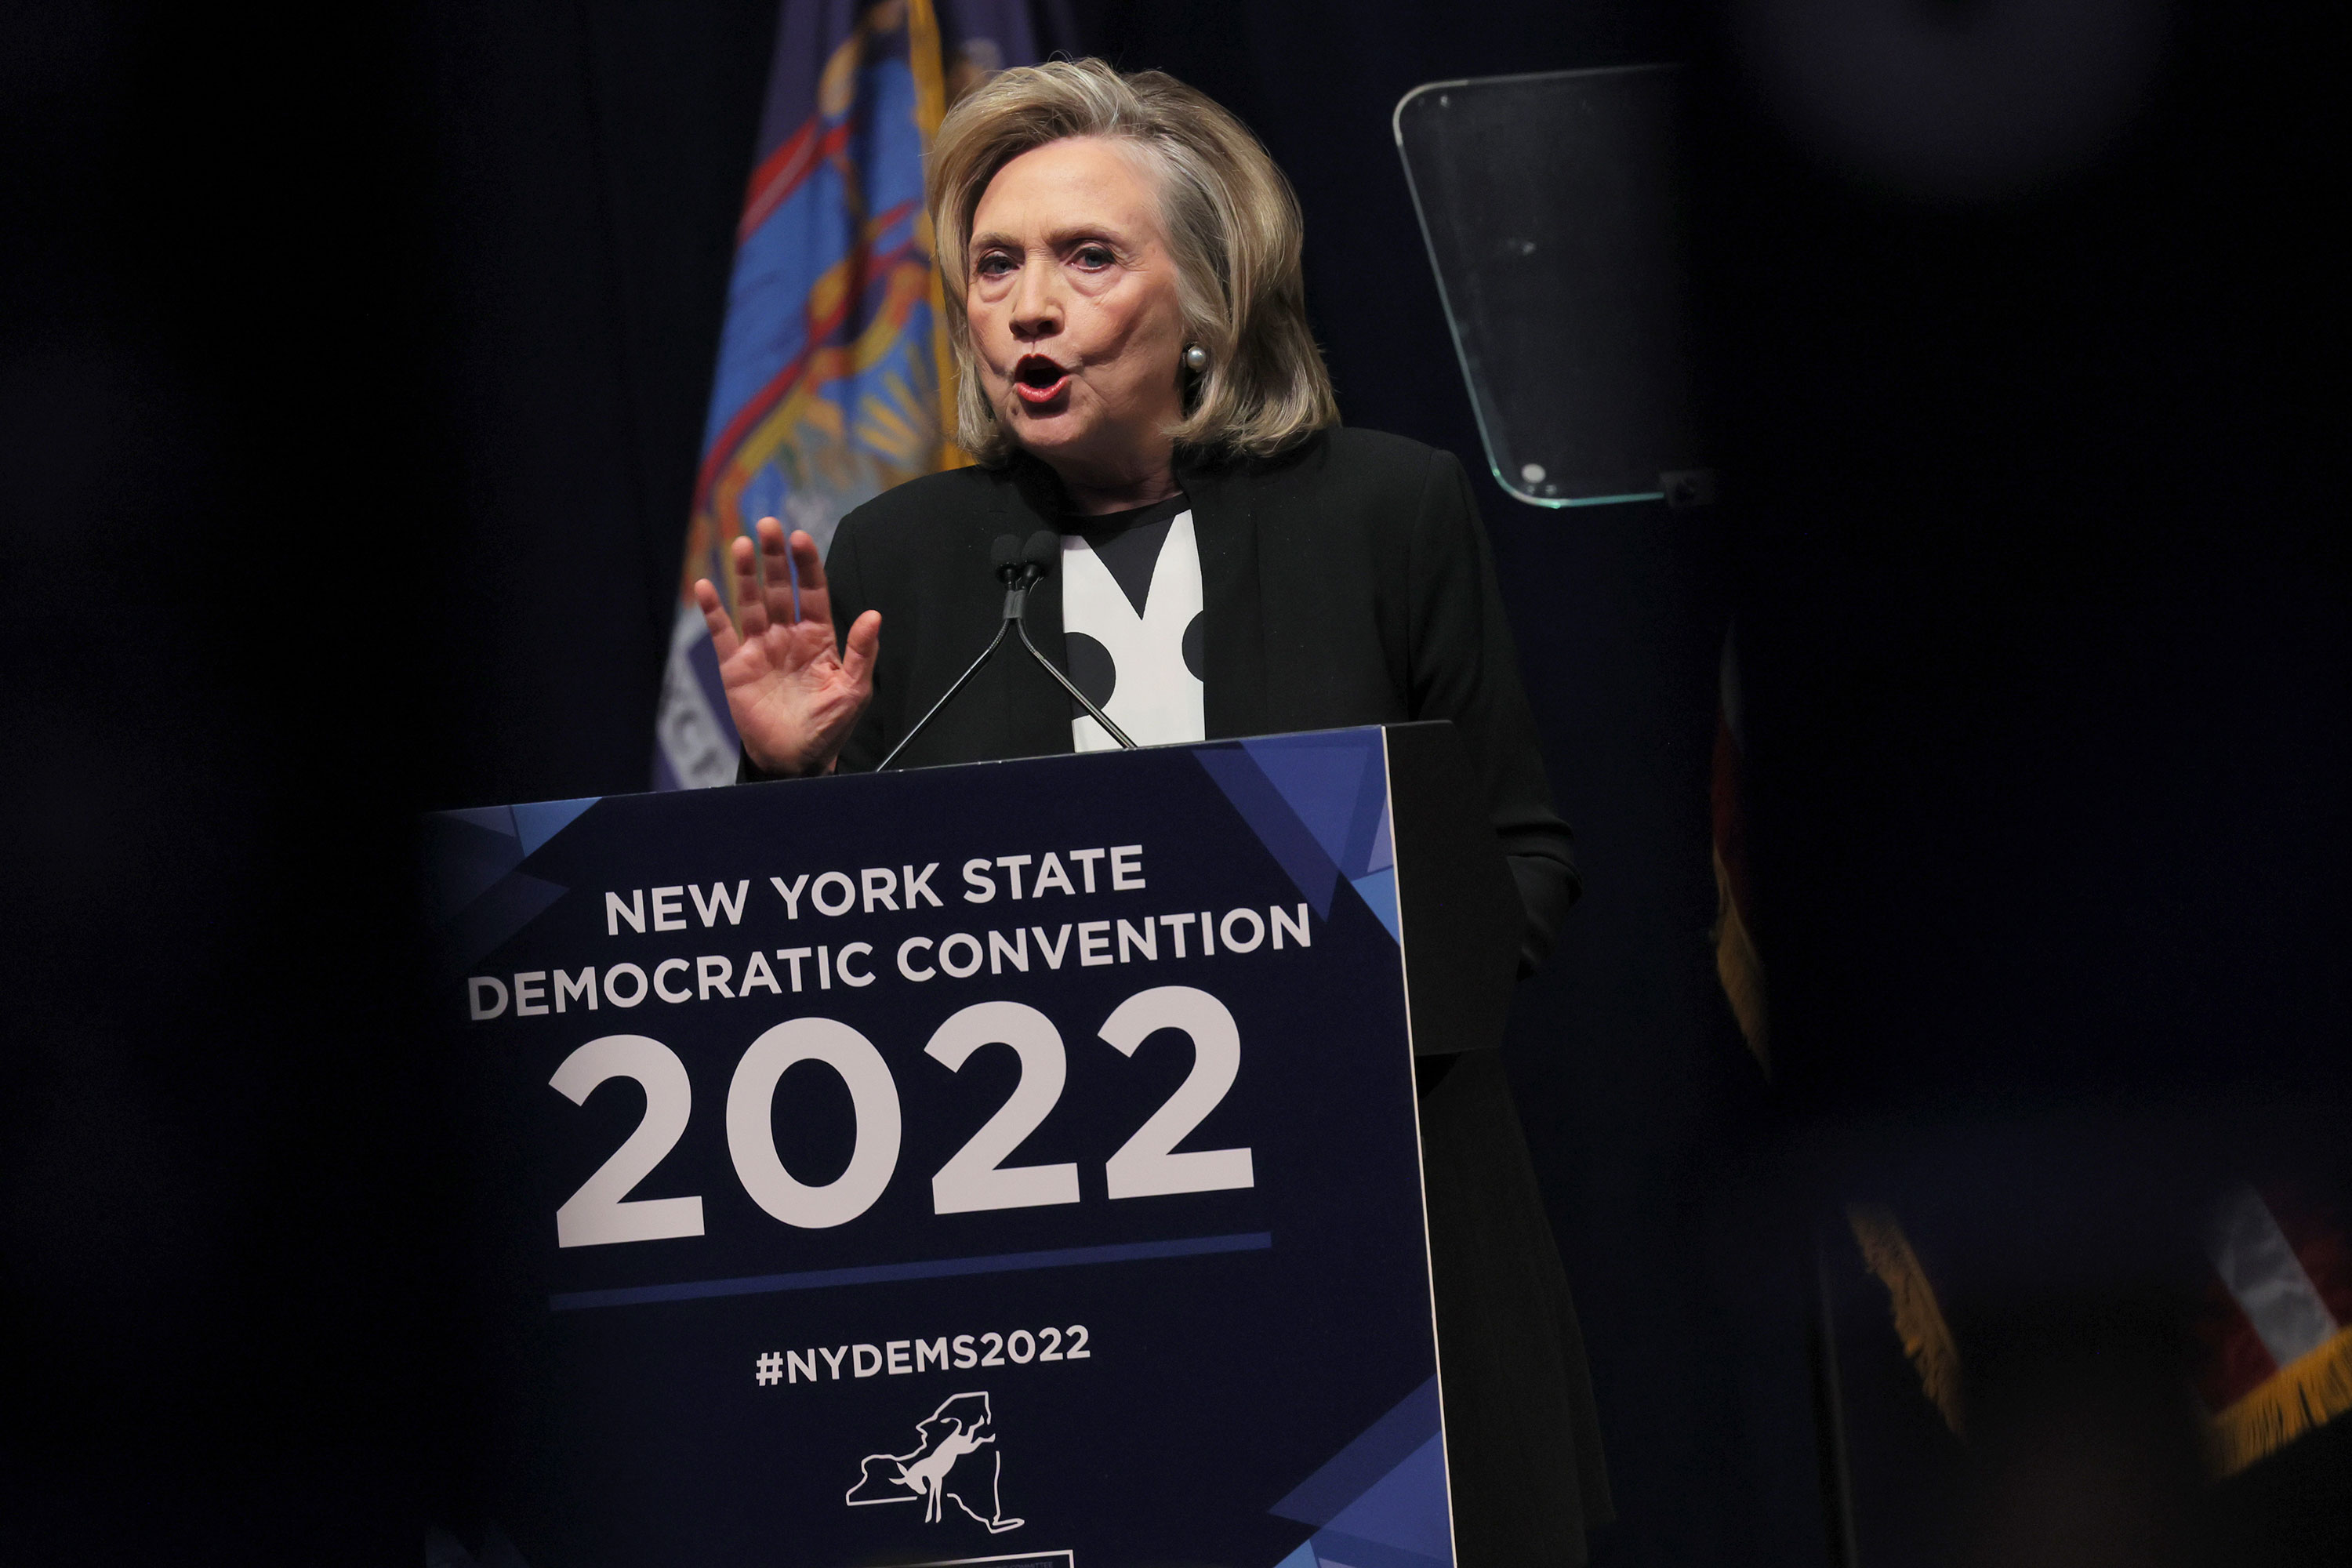 Hillary Clinton speaks during the 2022 New York State Democratic Convention in February.